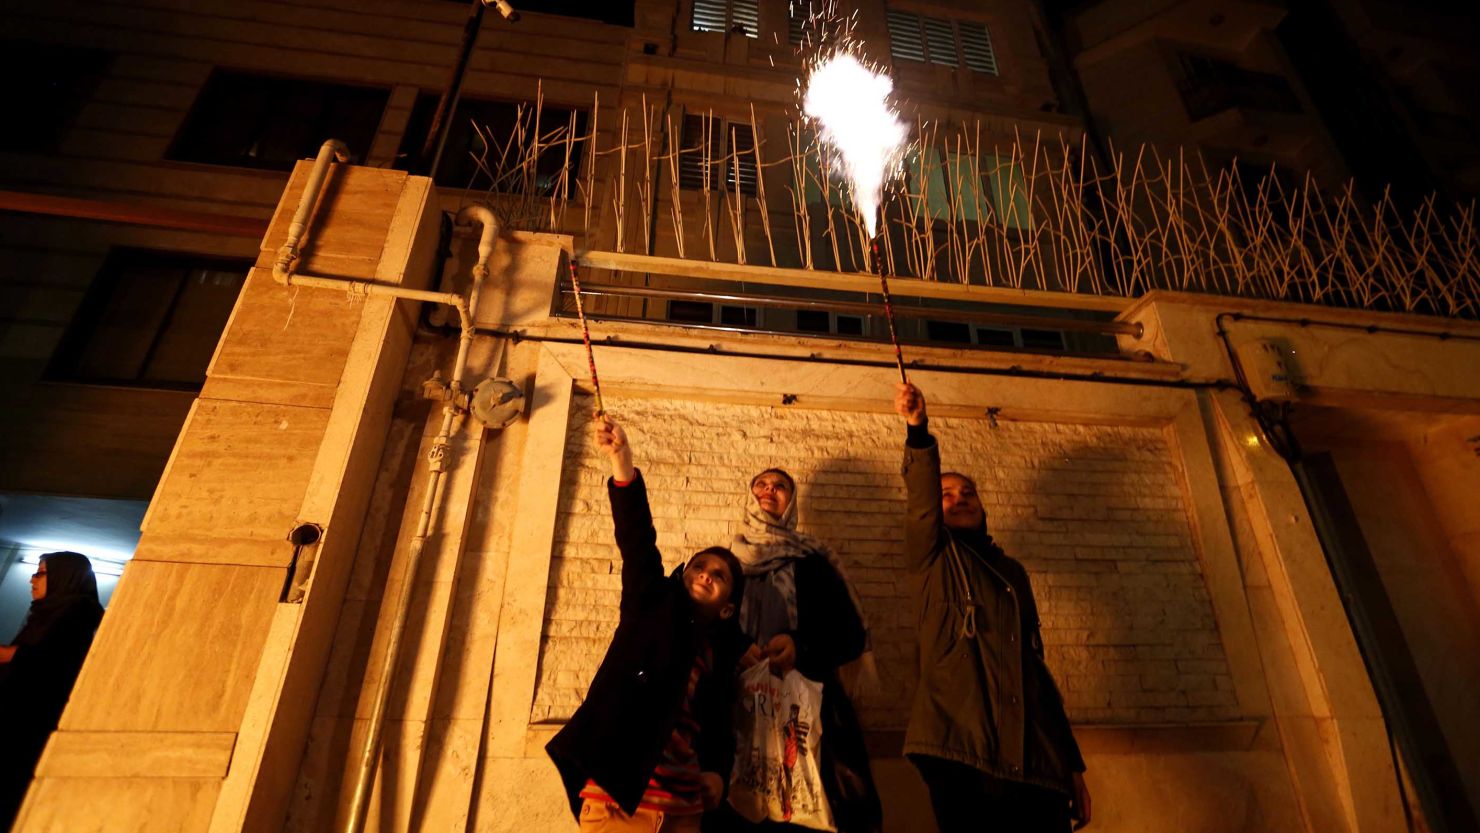 Iranian families light firecrackers outside their homes in Tehran on March 13, 2018 during Chaharshanbe Soori, held annually on the last Wednesday evening before Nowruz.